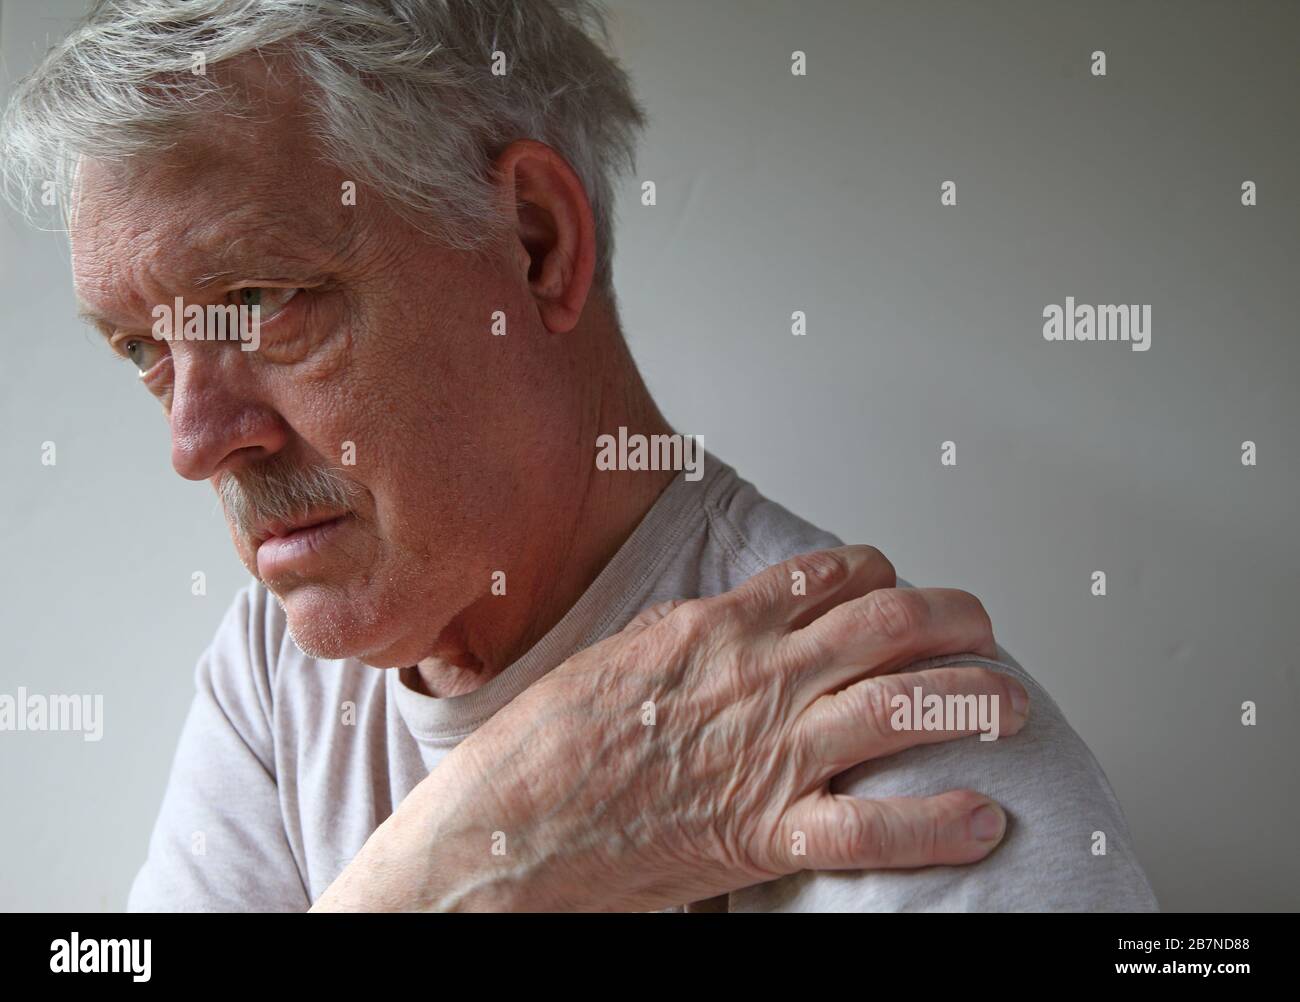 Senior man with a painful shoulder in natural light Stock Photo